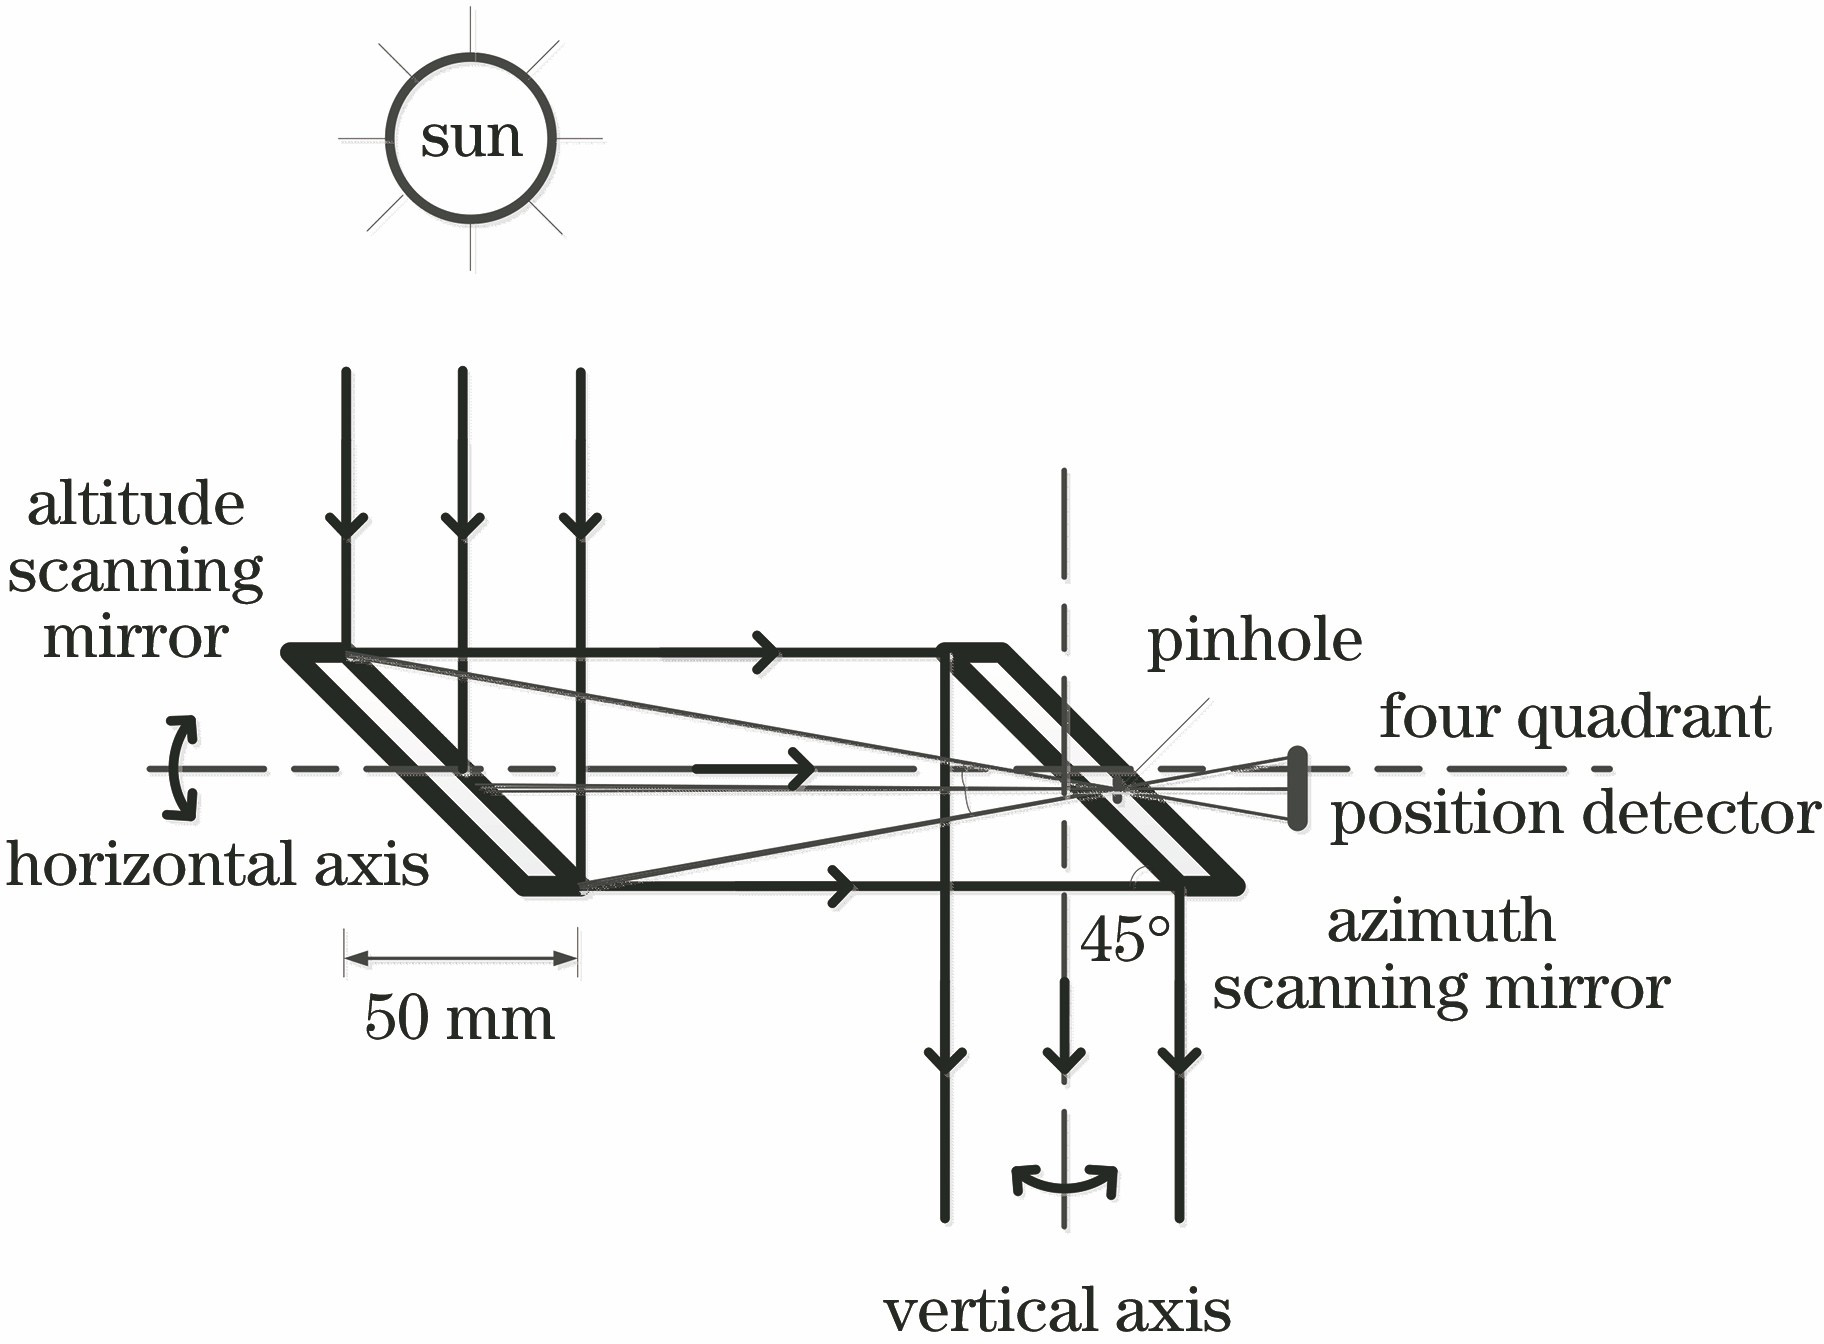 Structure of the optical path tracking system